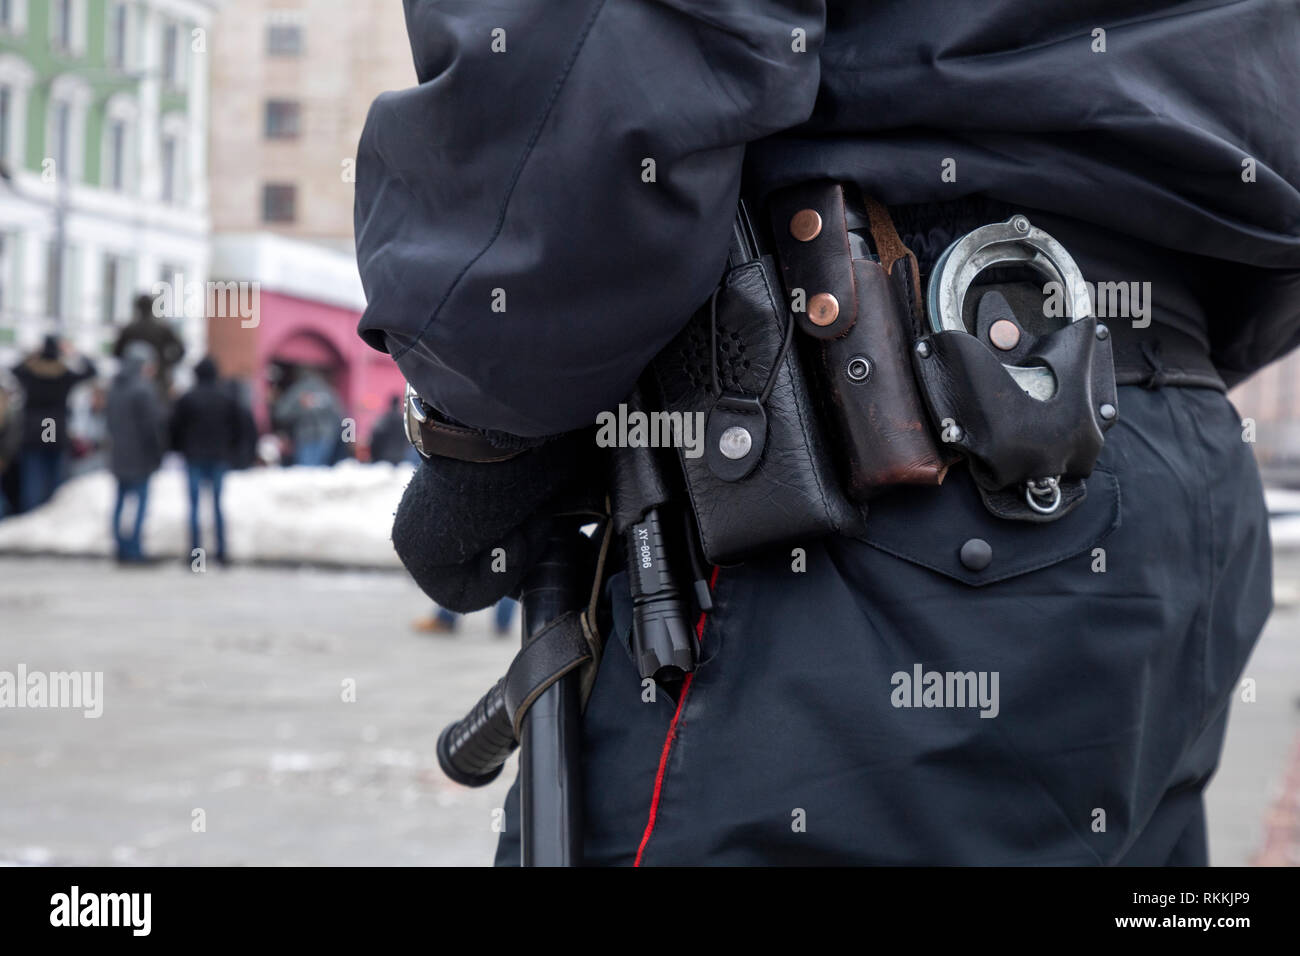 Outfit of the Moscow police officer patrols street during a rally, Russia Stock Photo